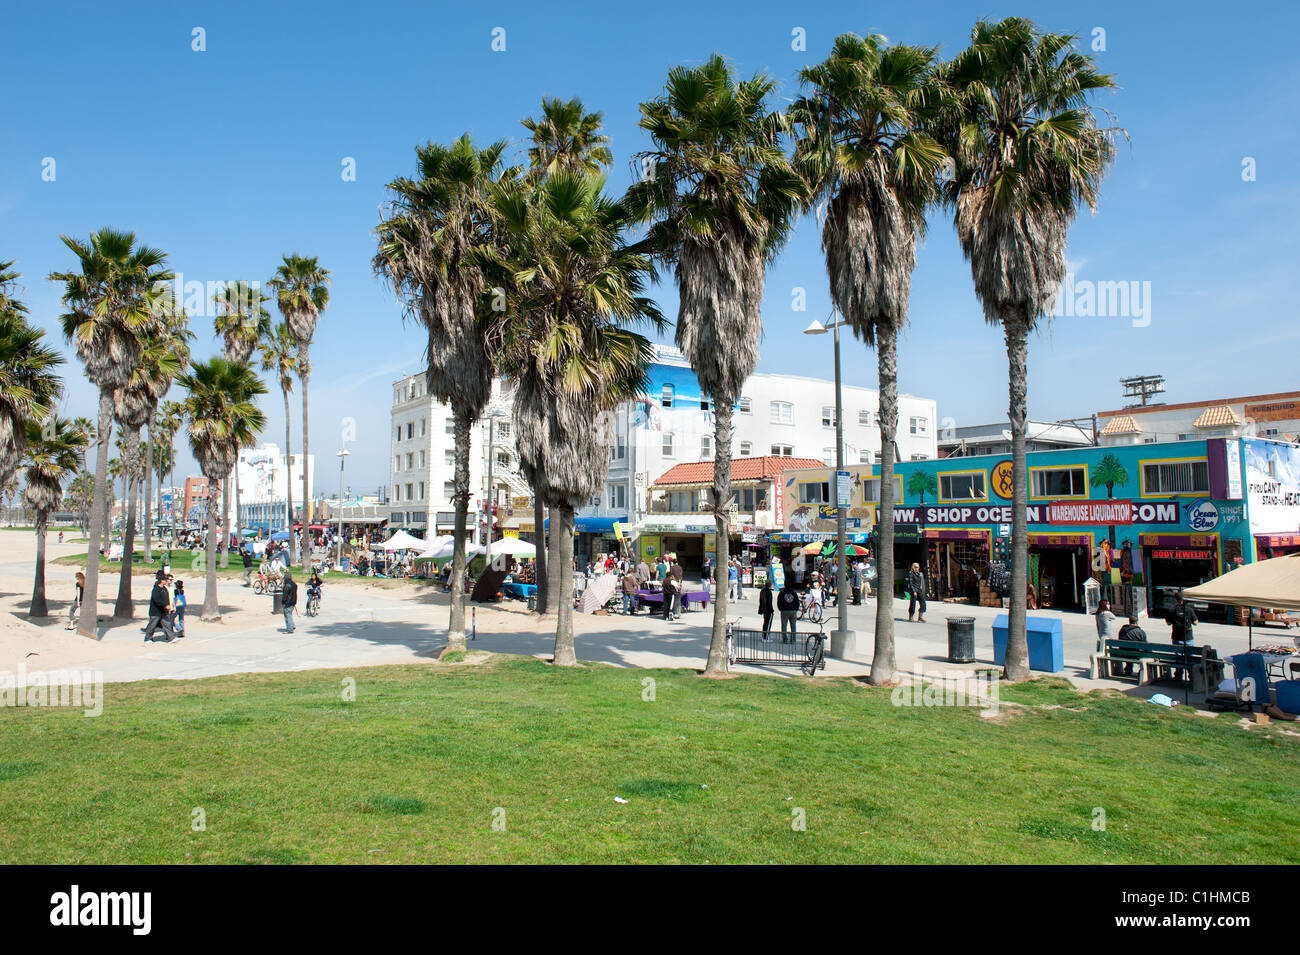 World famous Venice Beach boardwalk hosts nearly two miles of shops, eateries and street vendors Stock Photo